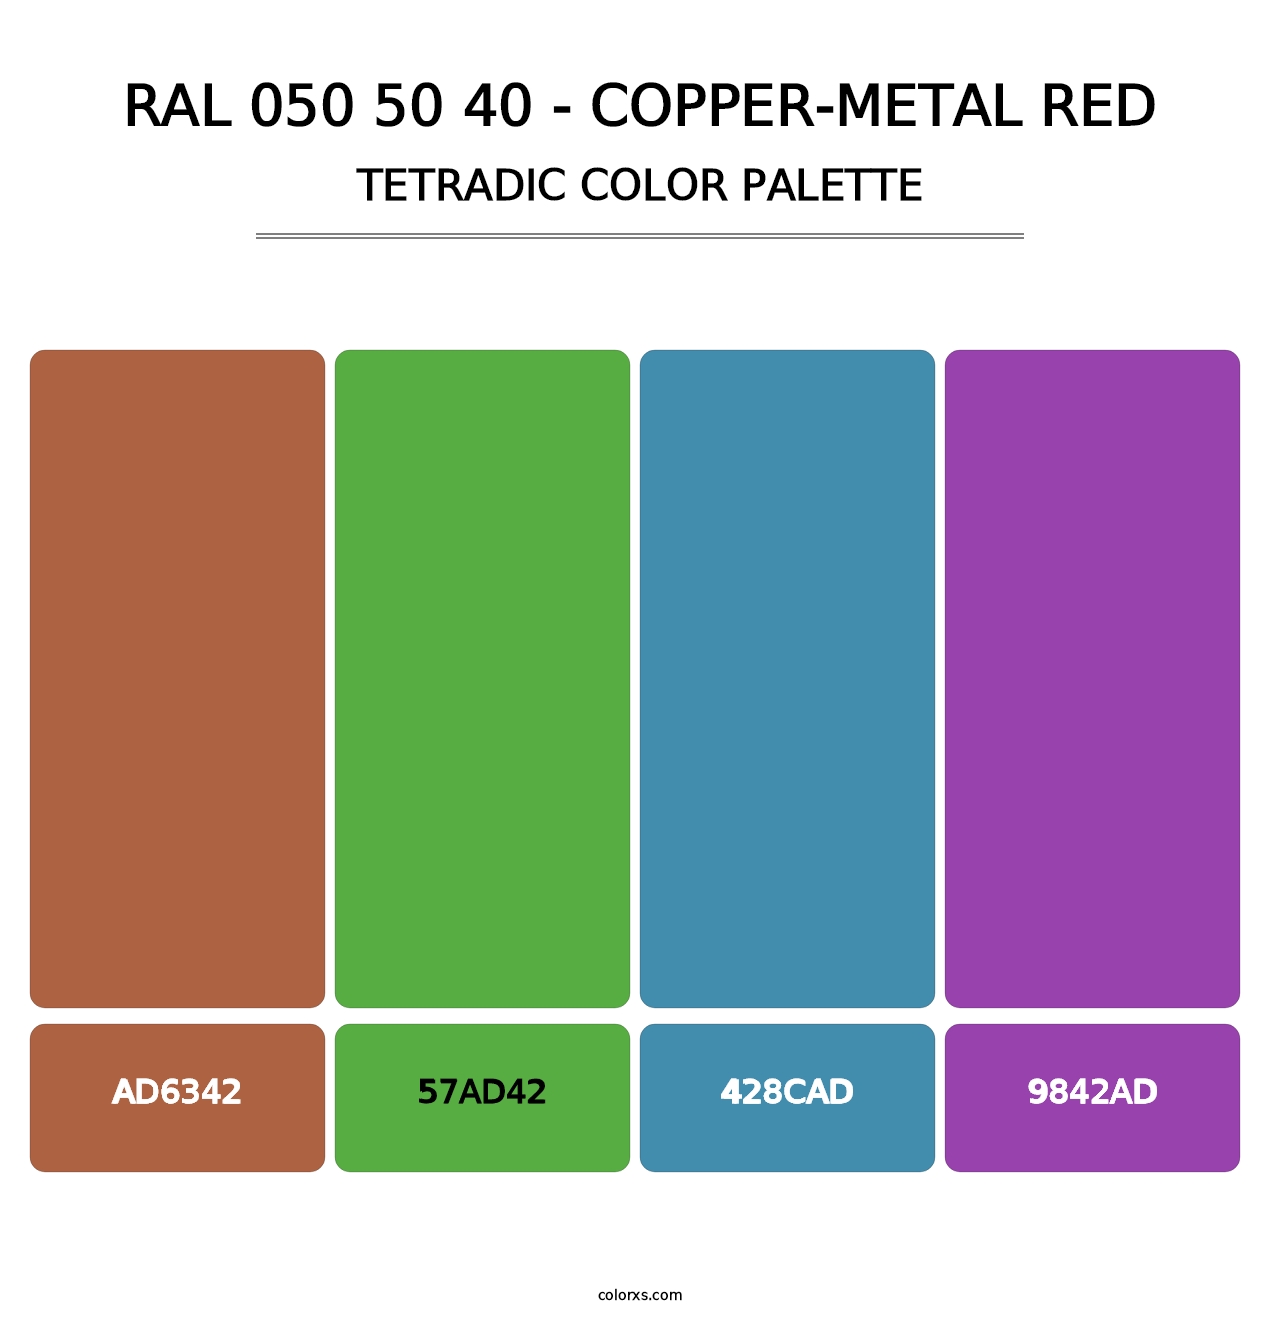 RAL 050 50 40 - Copper-Metal Red - Tetradic Color Palette